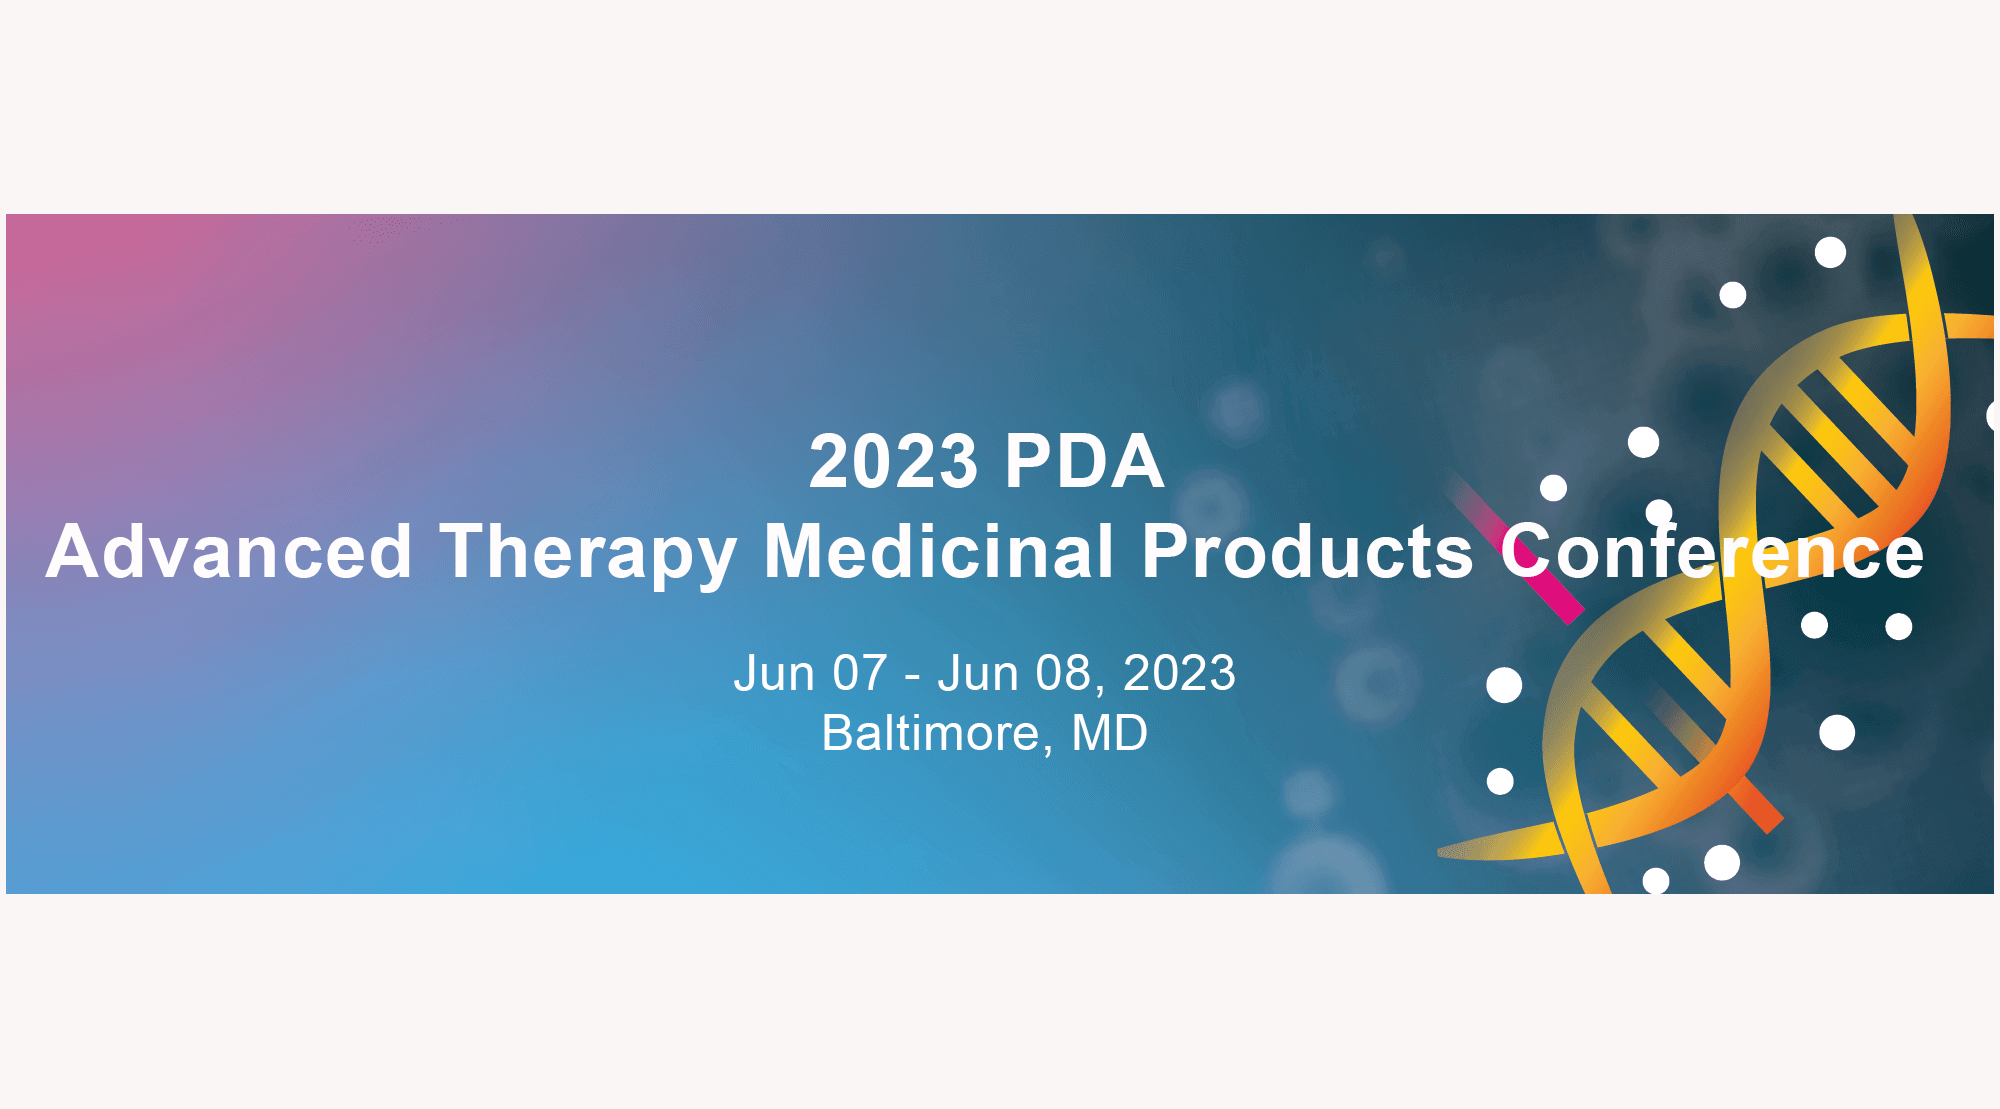 2023 PDA Advanced Therapy Medicinal Products Conference